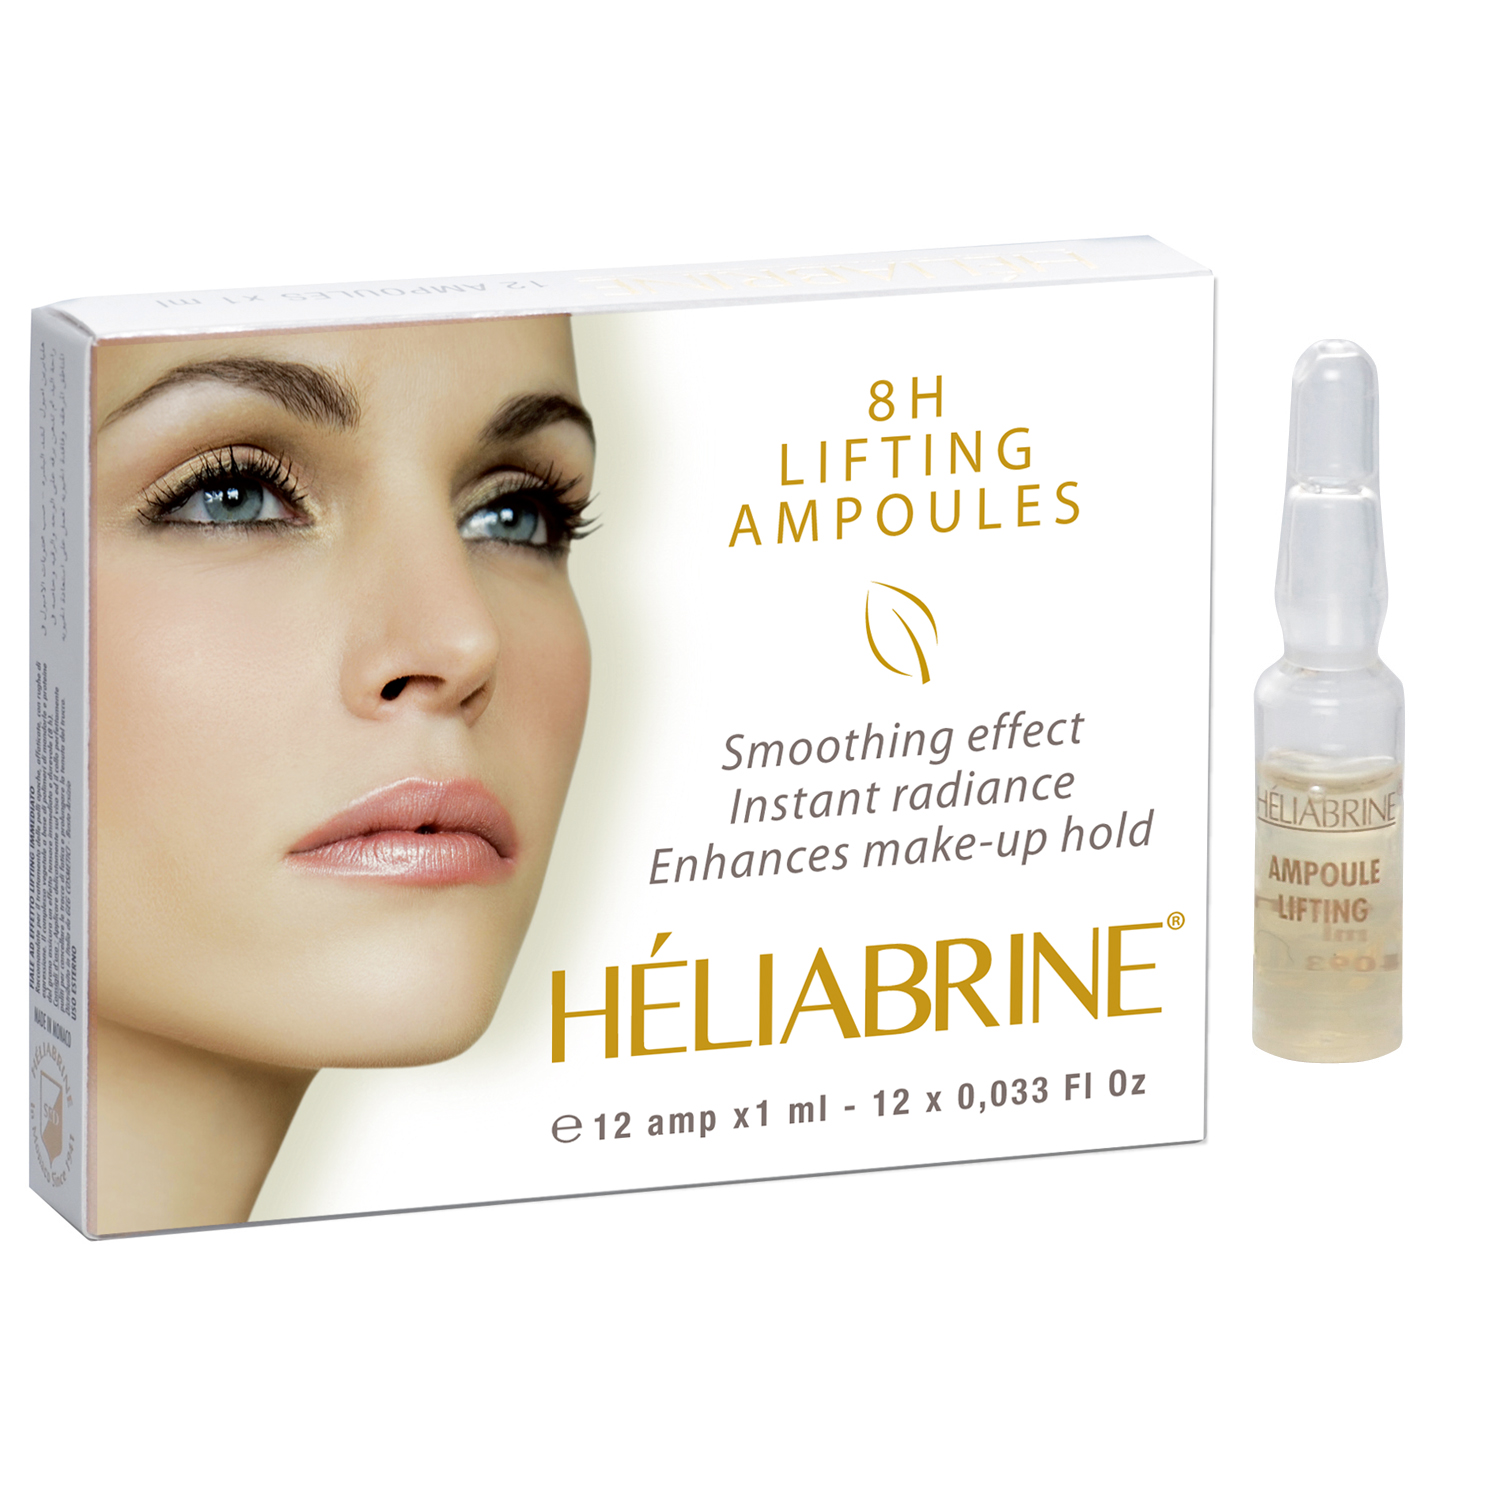 8H LIFTING AMPOULES  12 X 1 ml